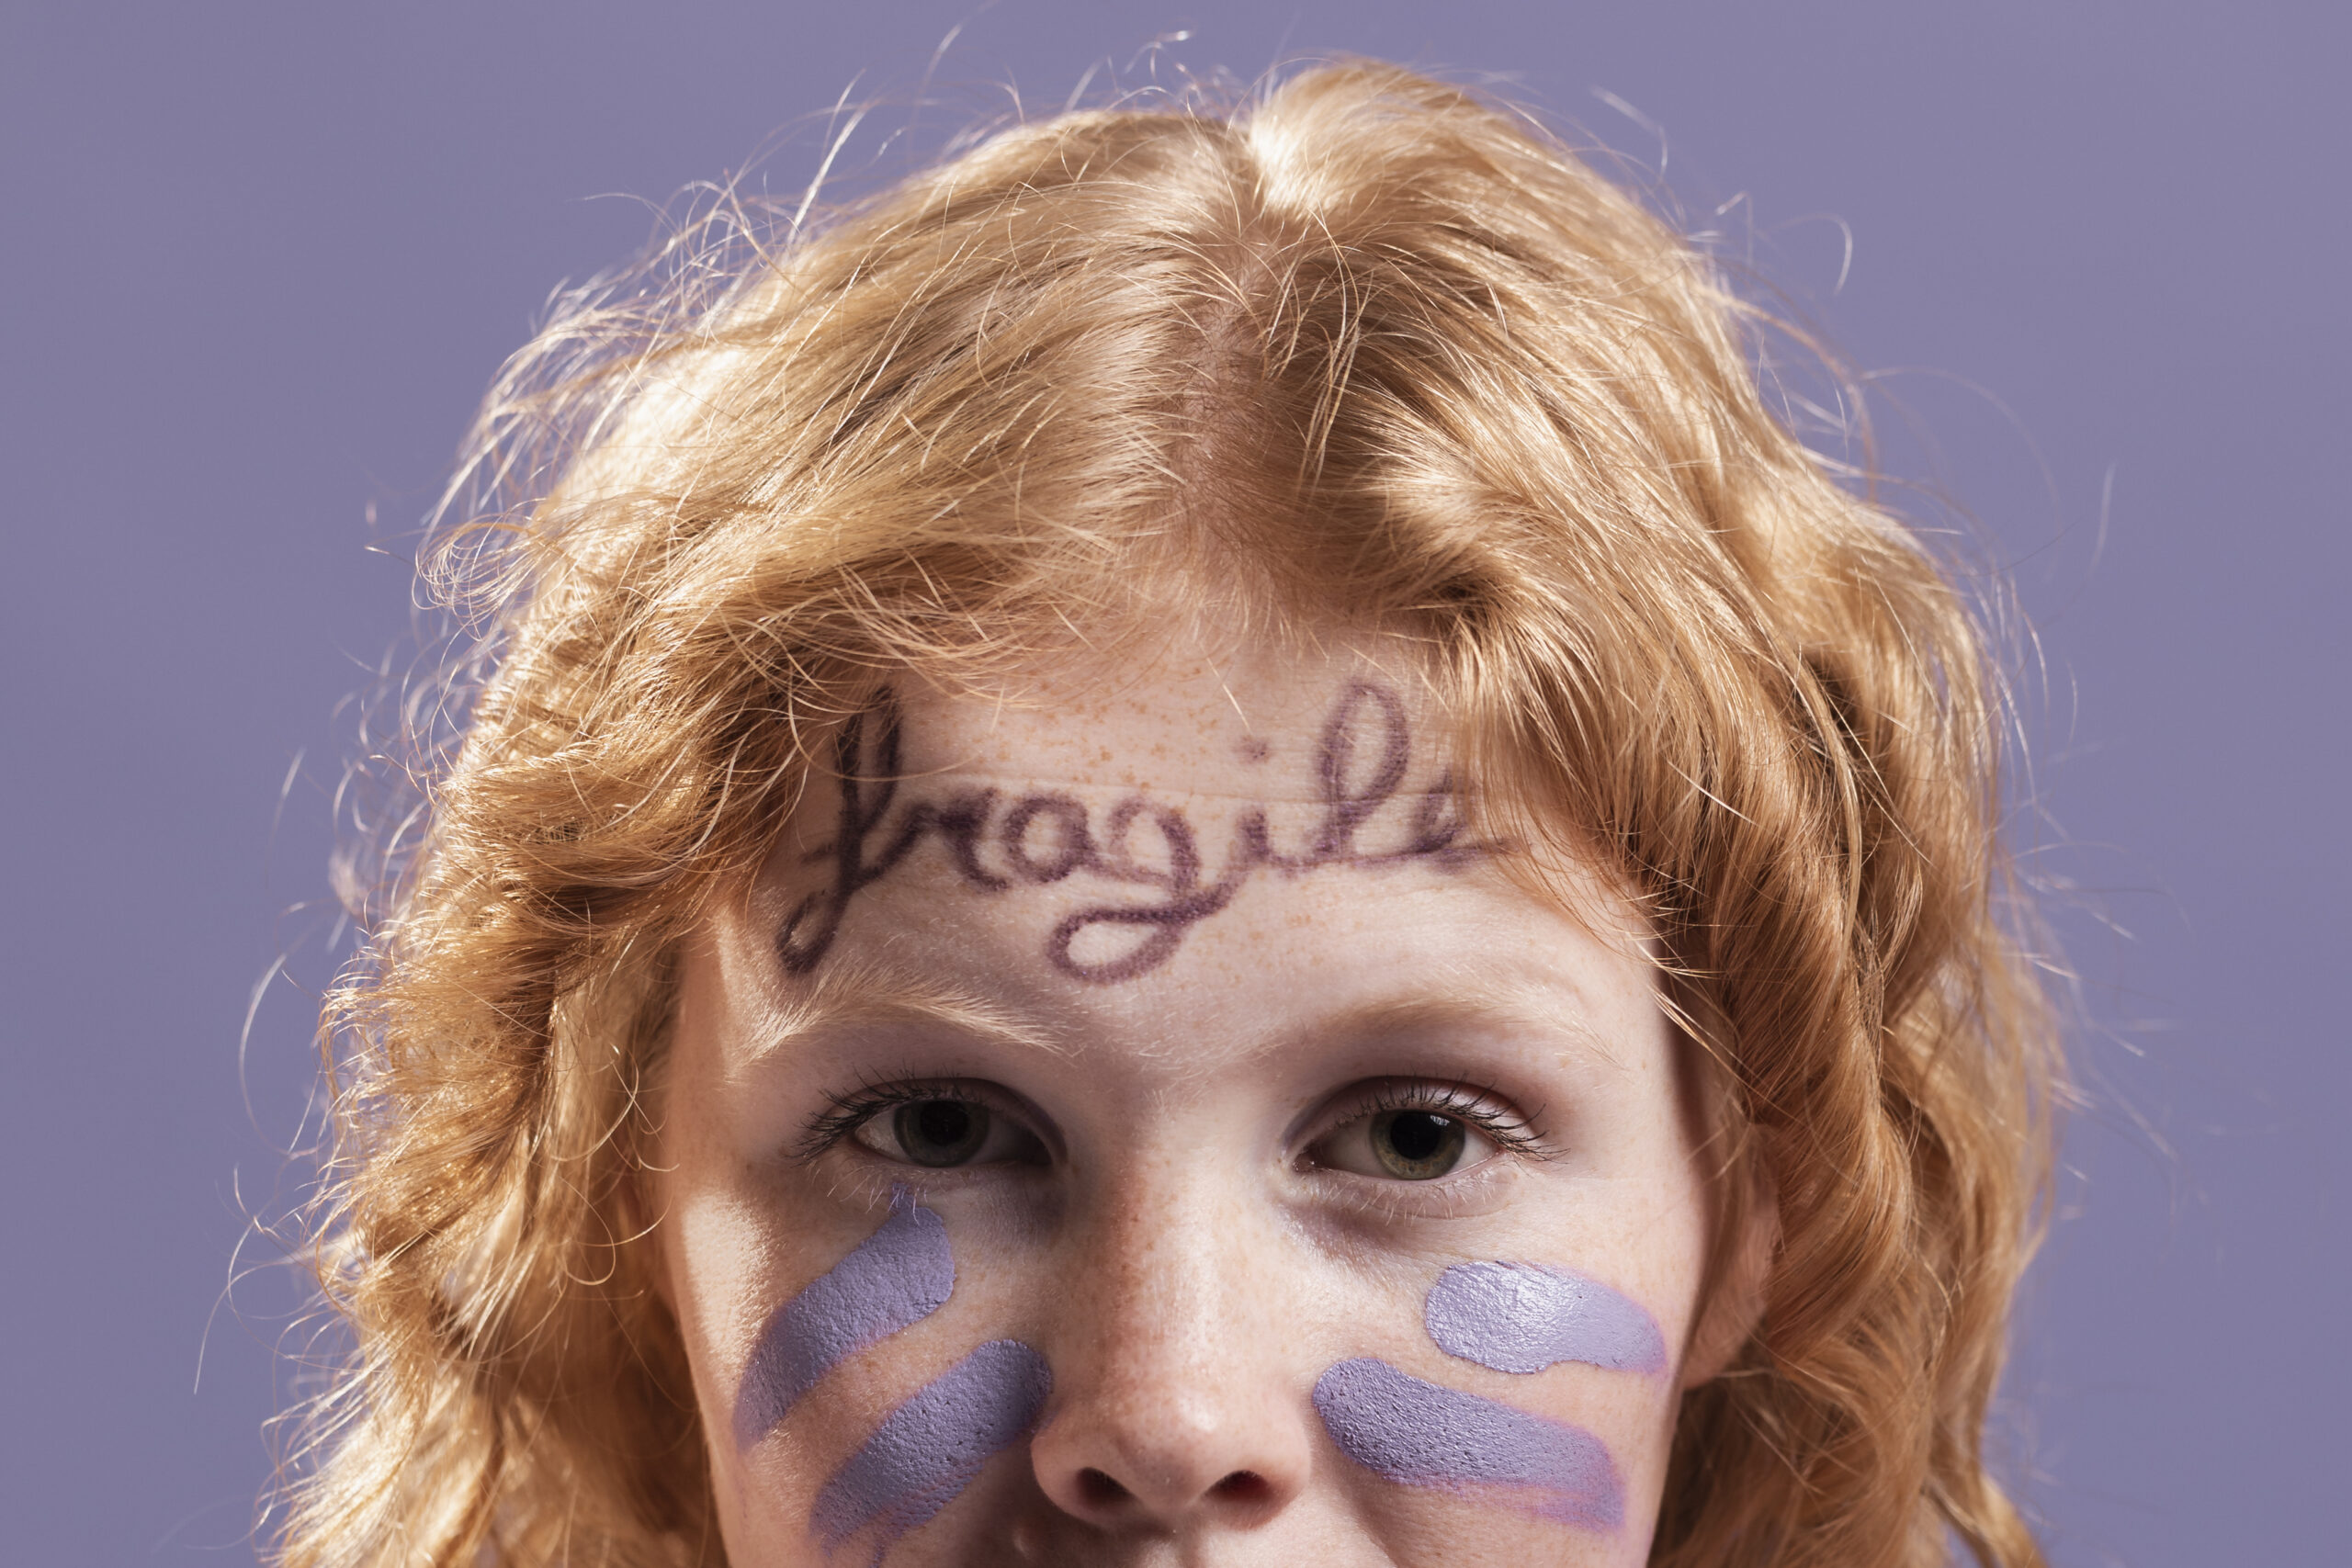 redhead-woman-posing-while-being-covered-with-dismissive-words-paint